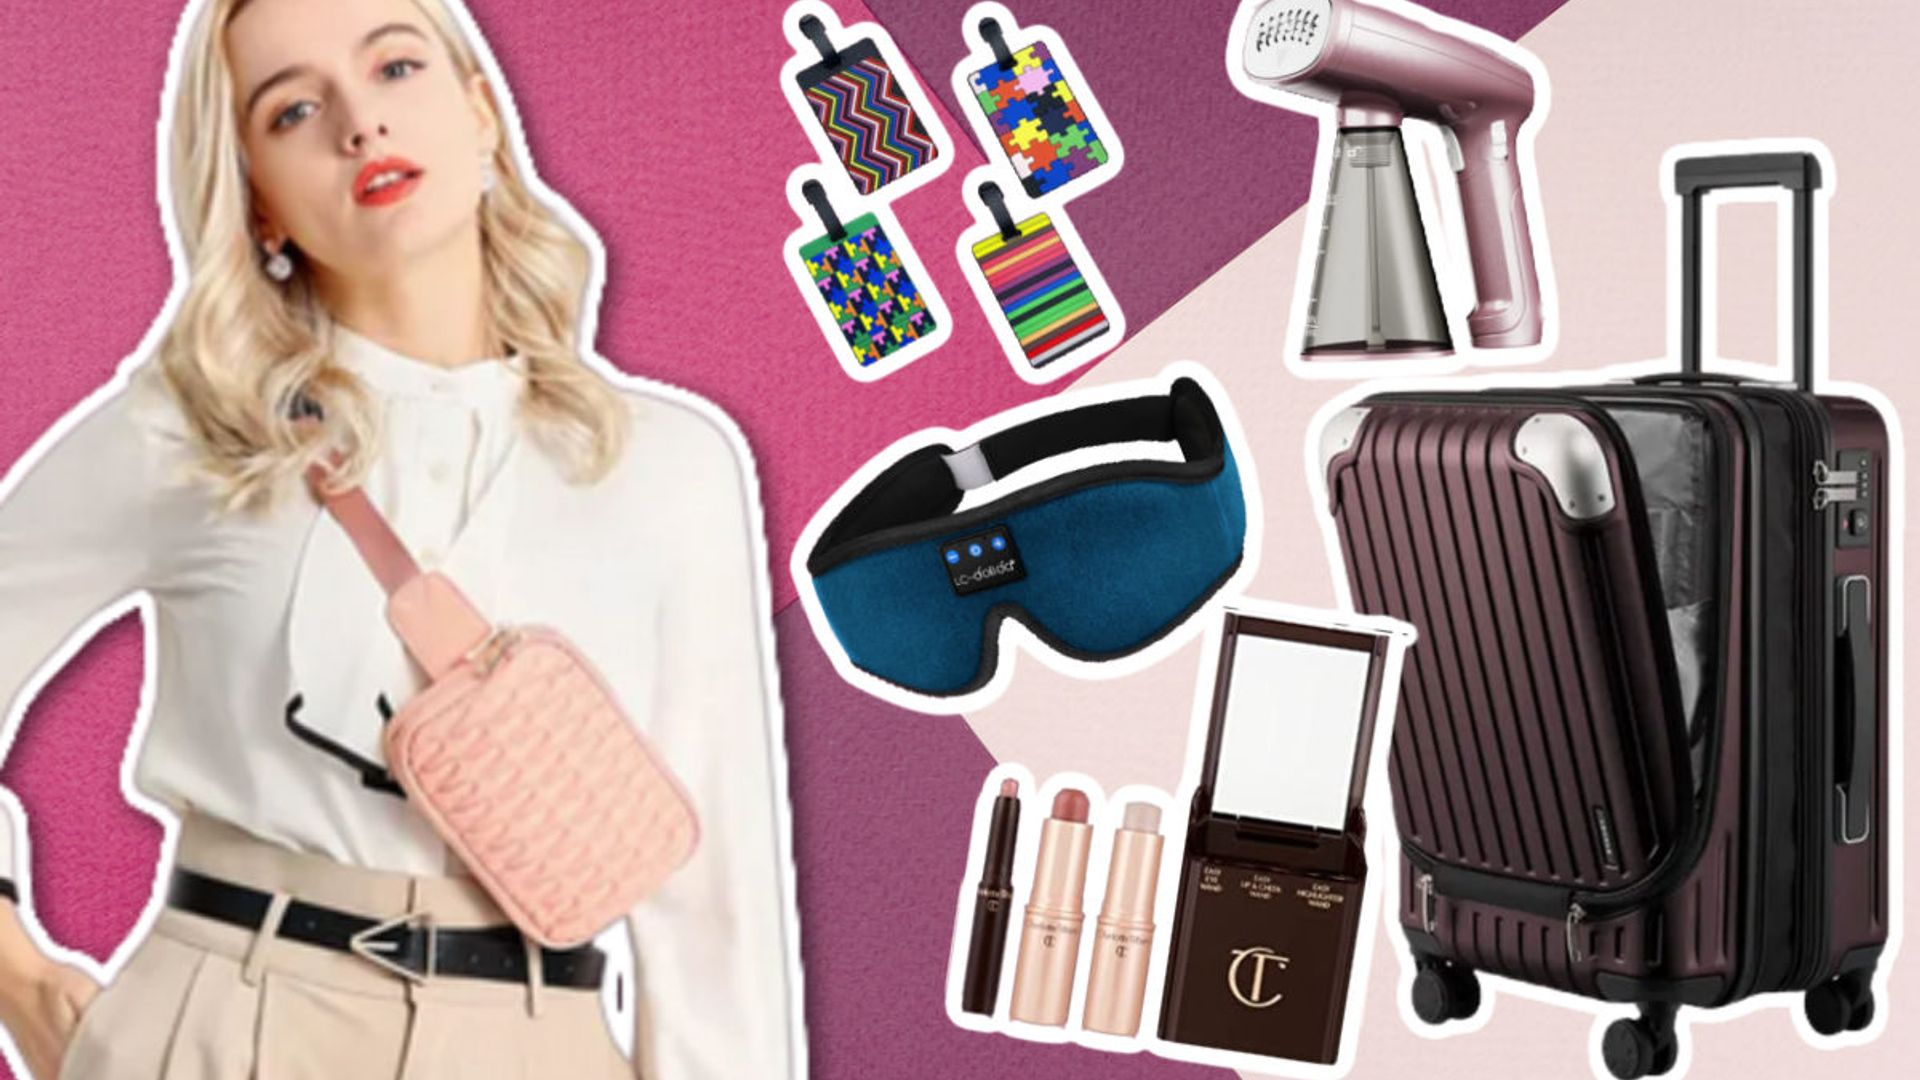 55+ Perfect Travel Gifts for Her That She'll Love! - Anita Hendrieka